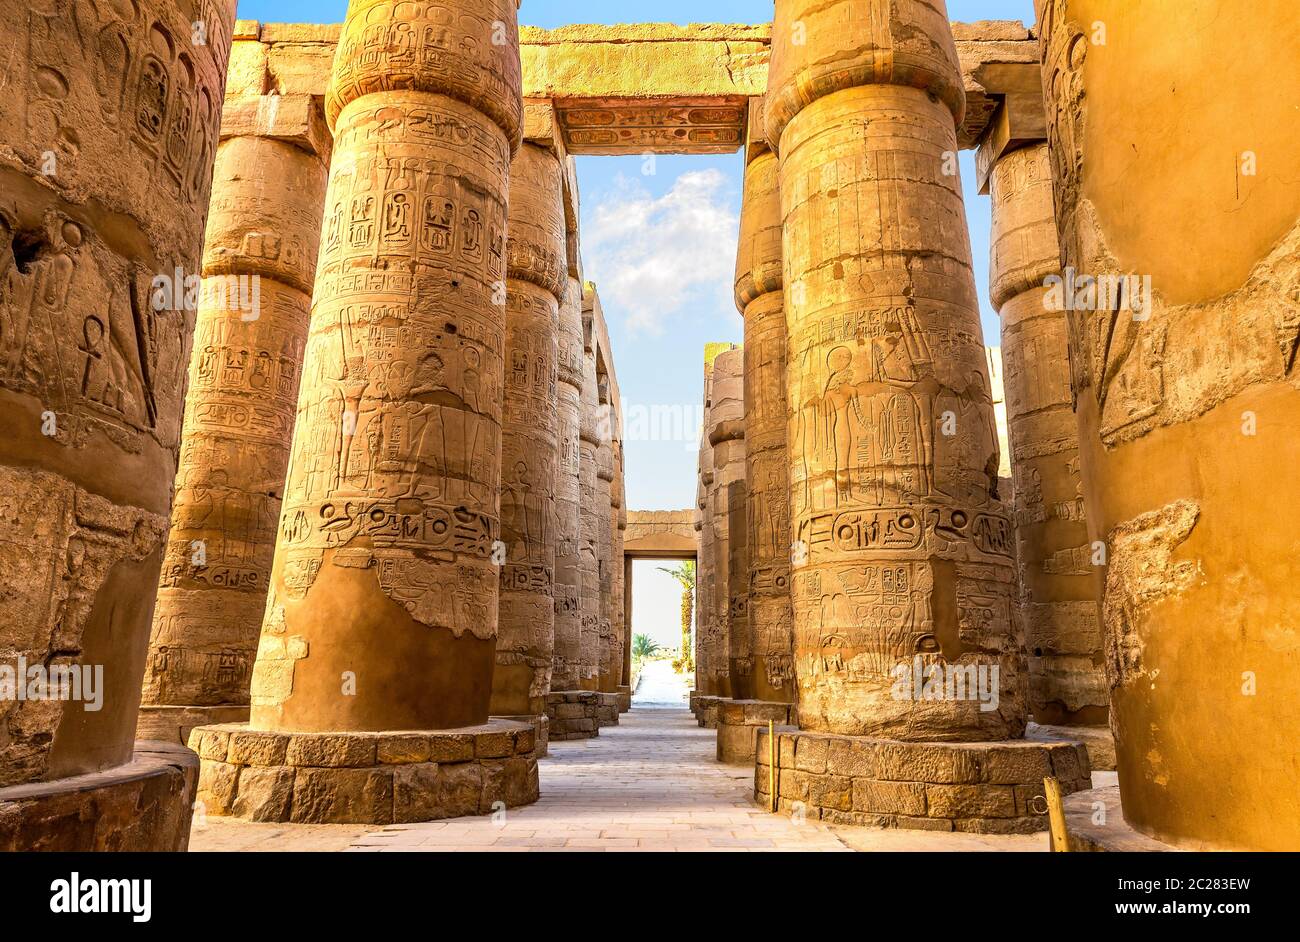 Central colonnade of Karnak temple in Luxor at sunrise, Egypt Stock Photo